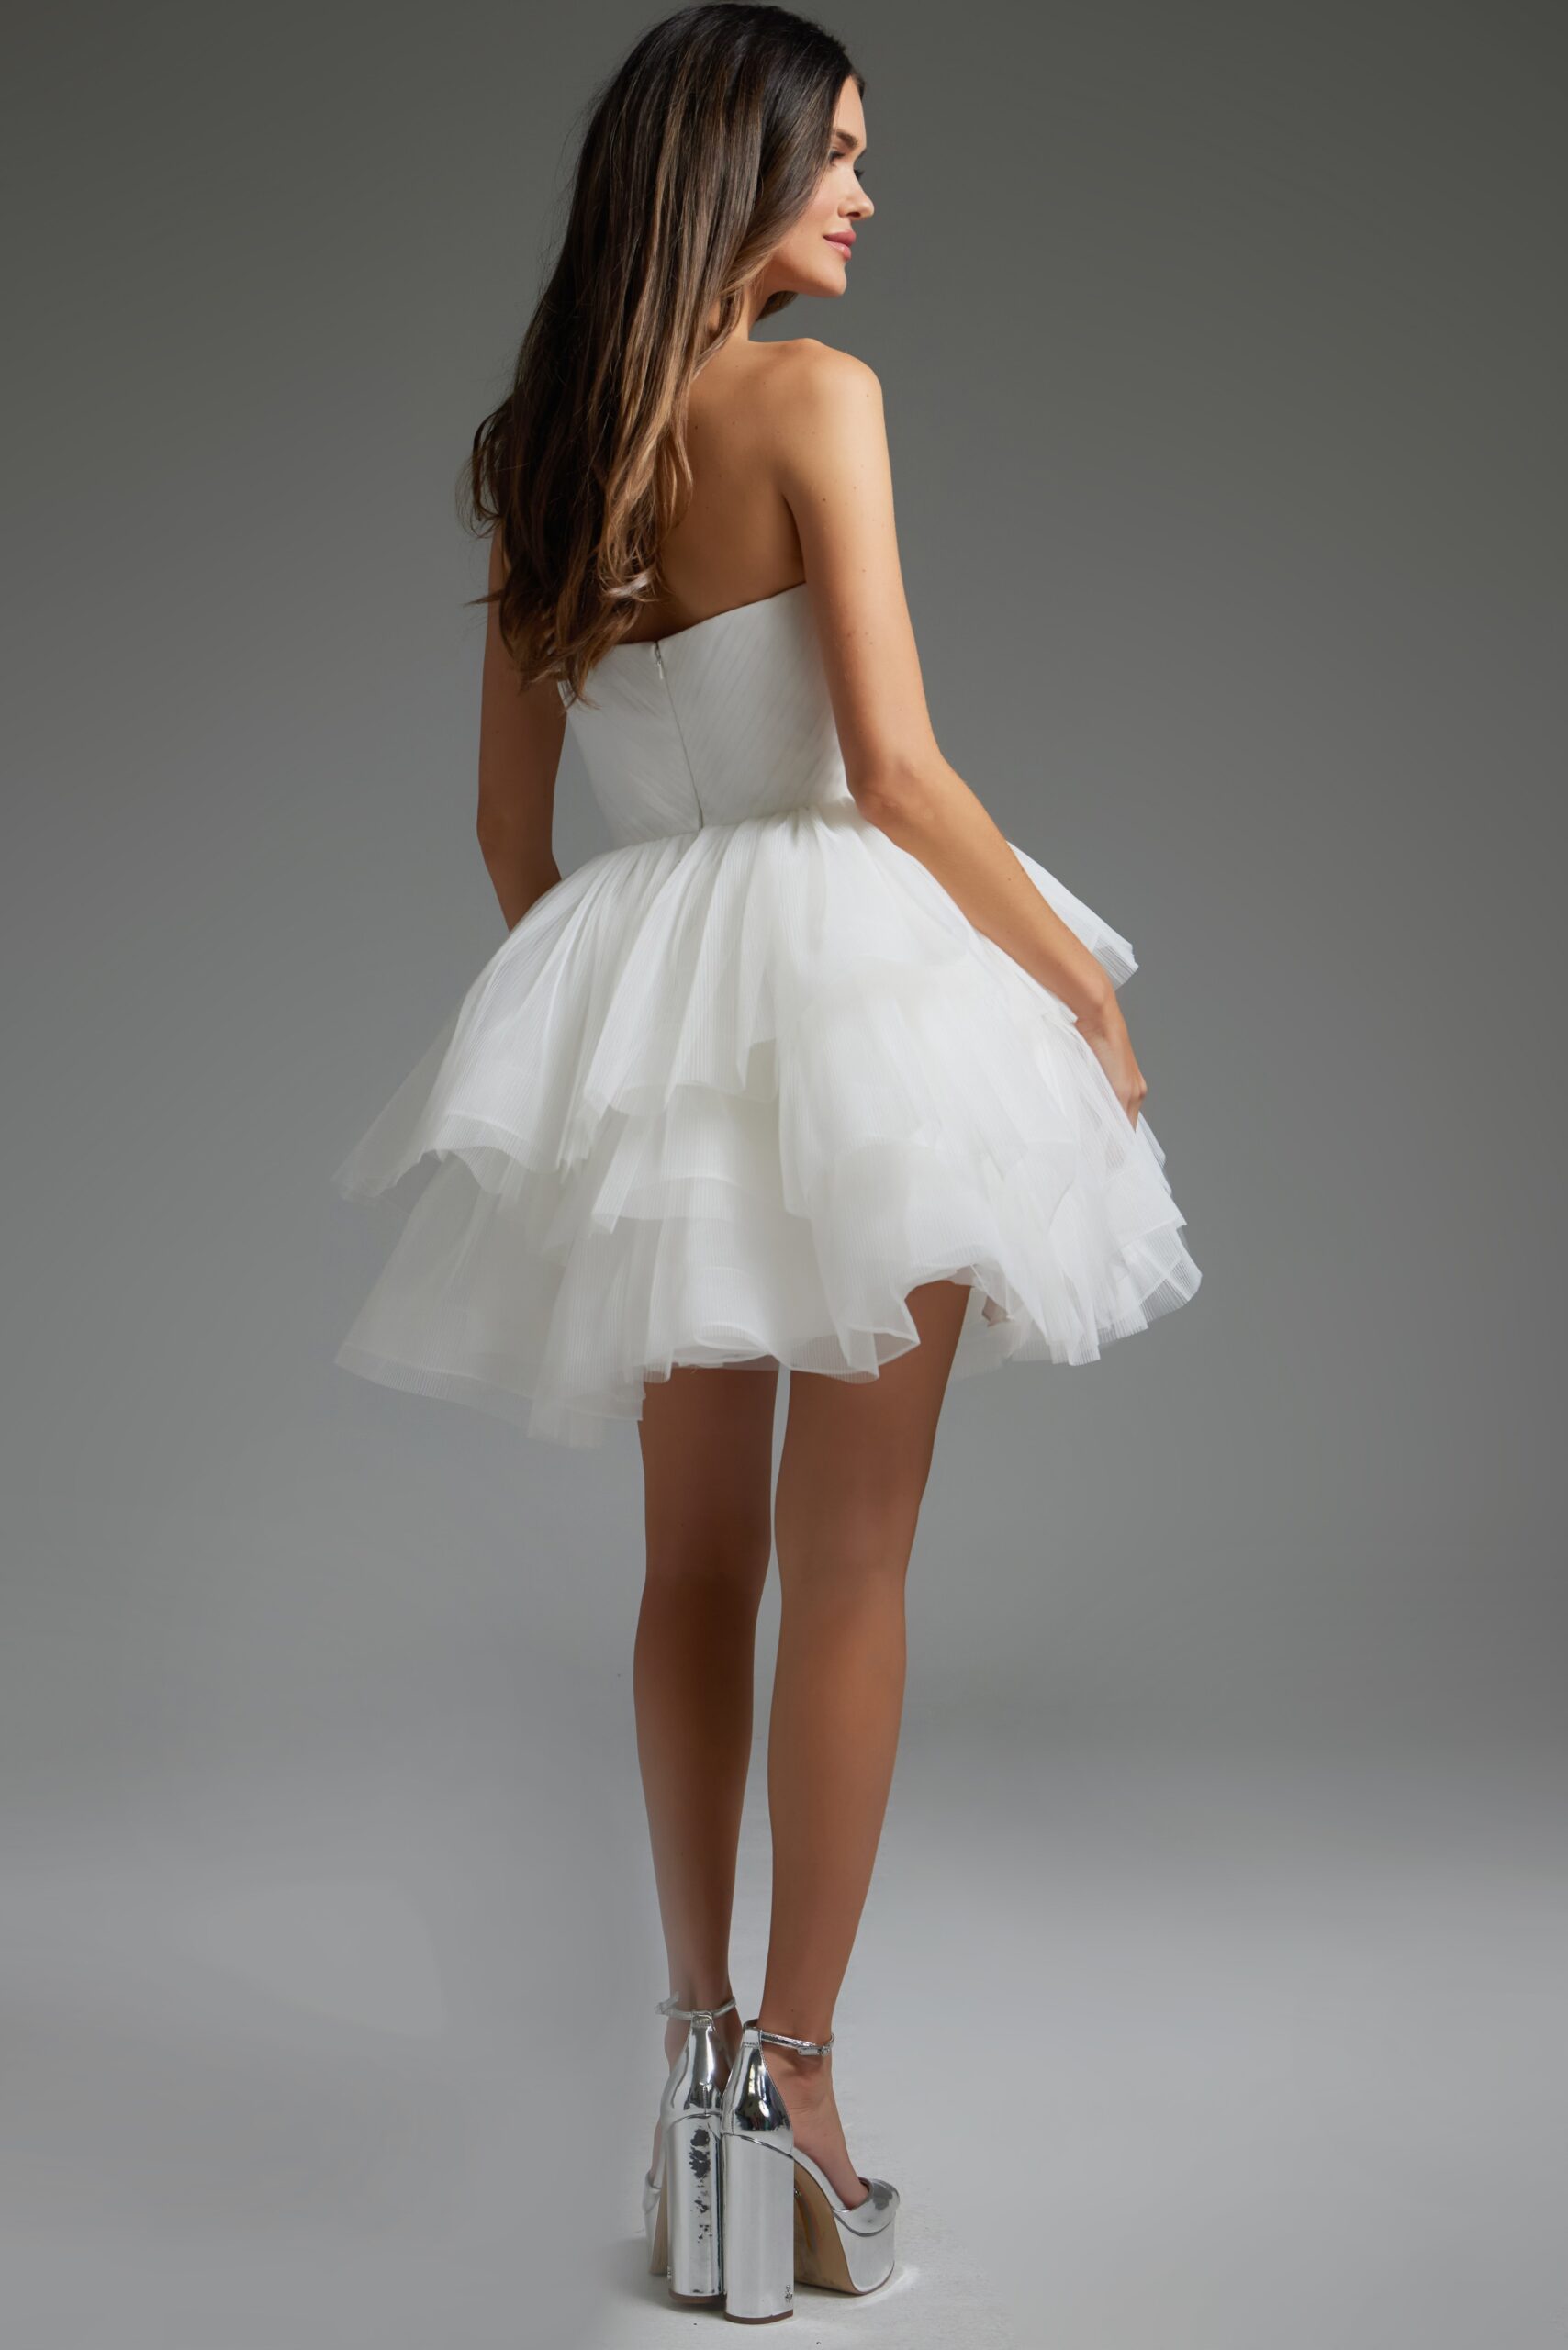 Off White Fit and Flare Strapless Dress 41054